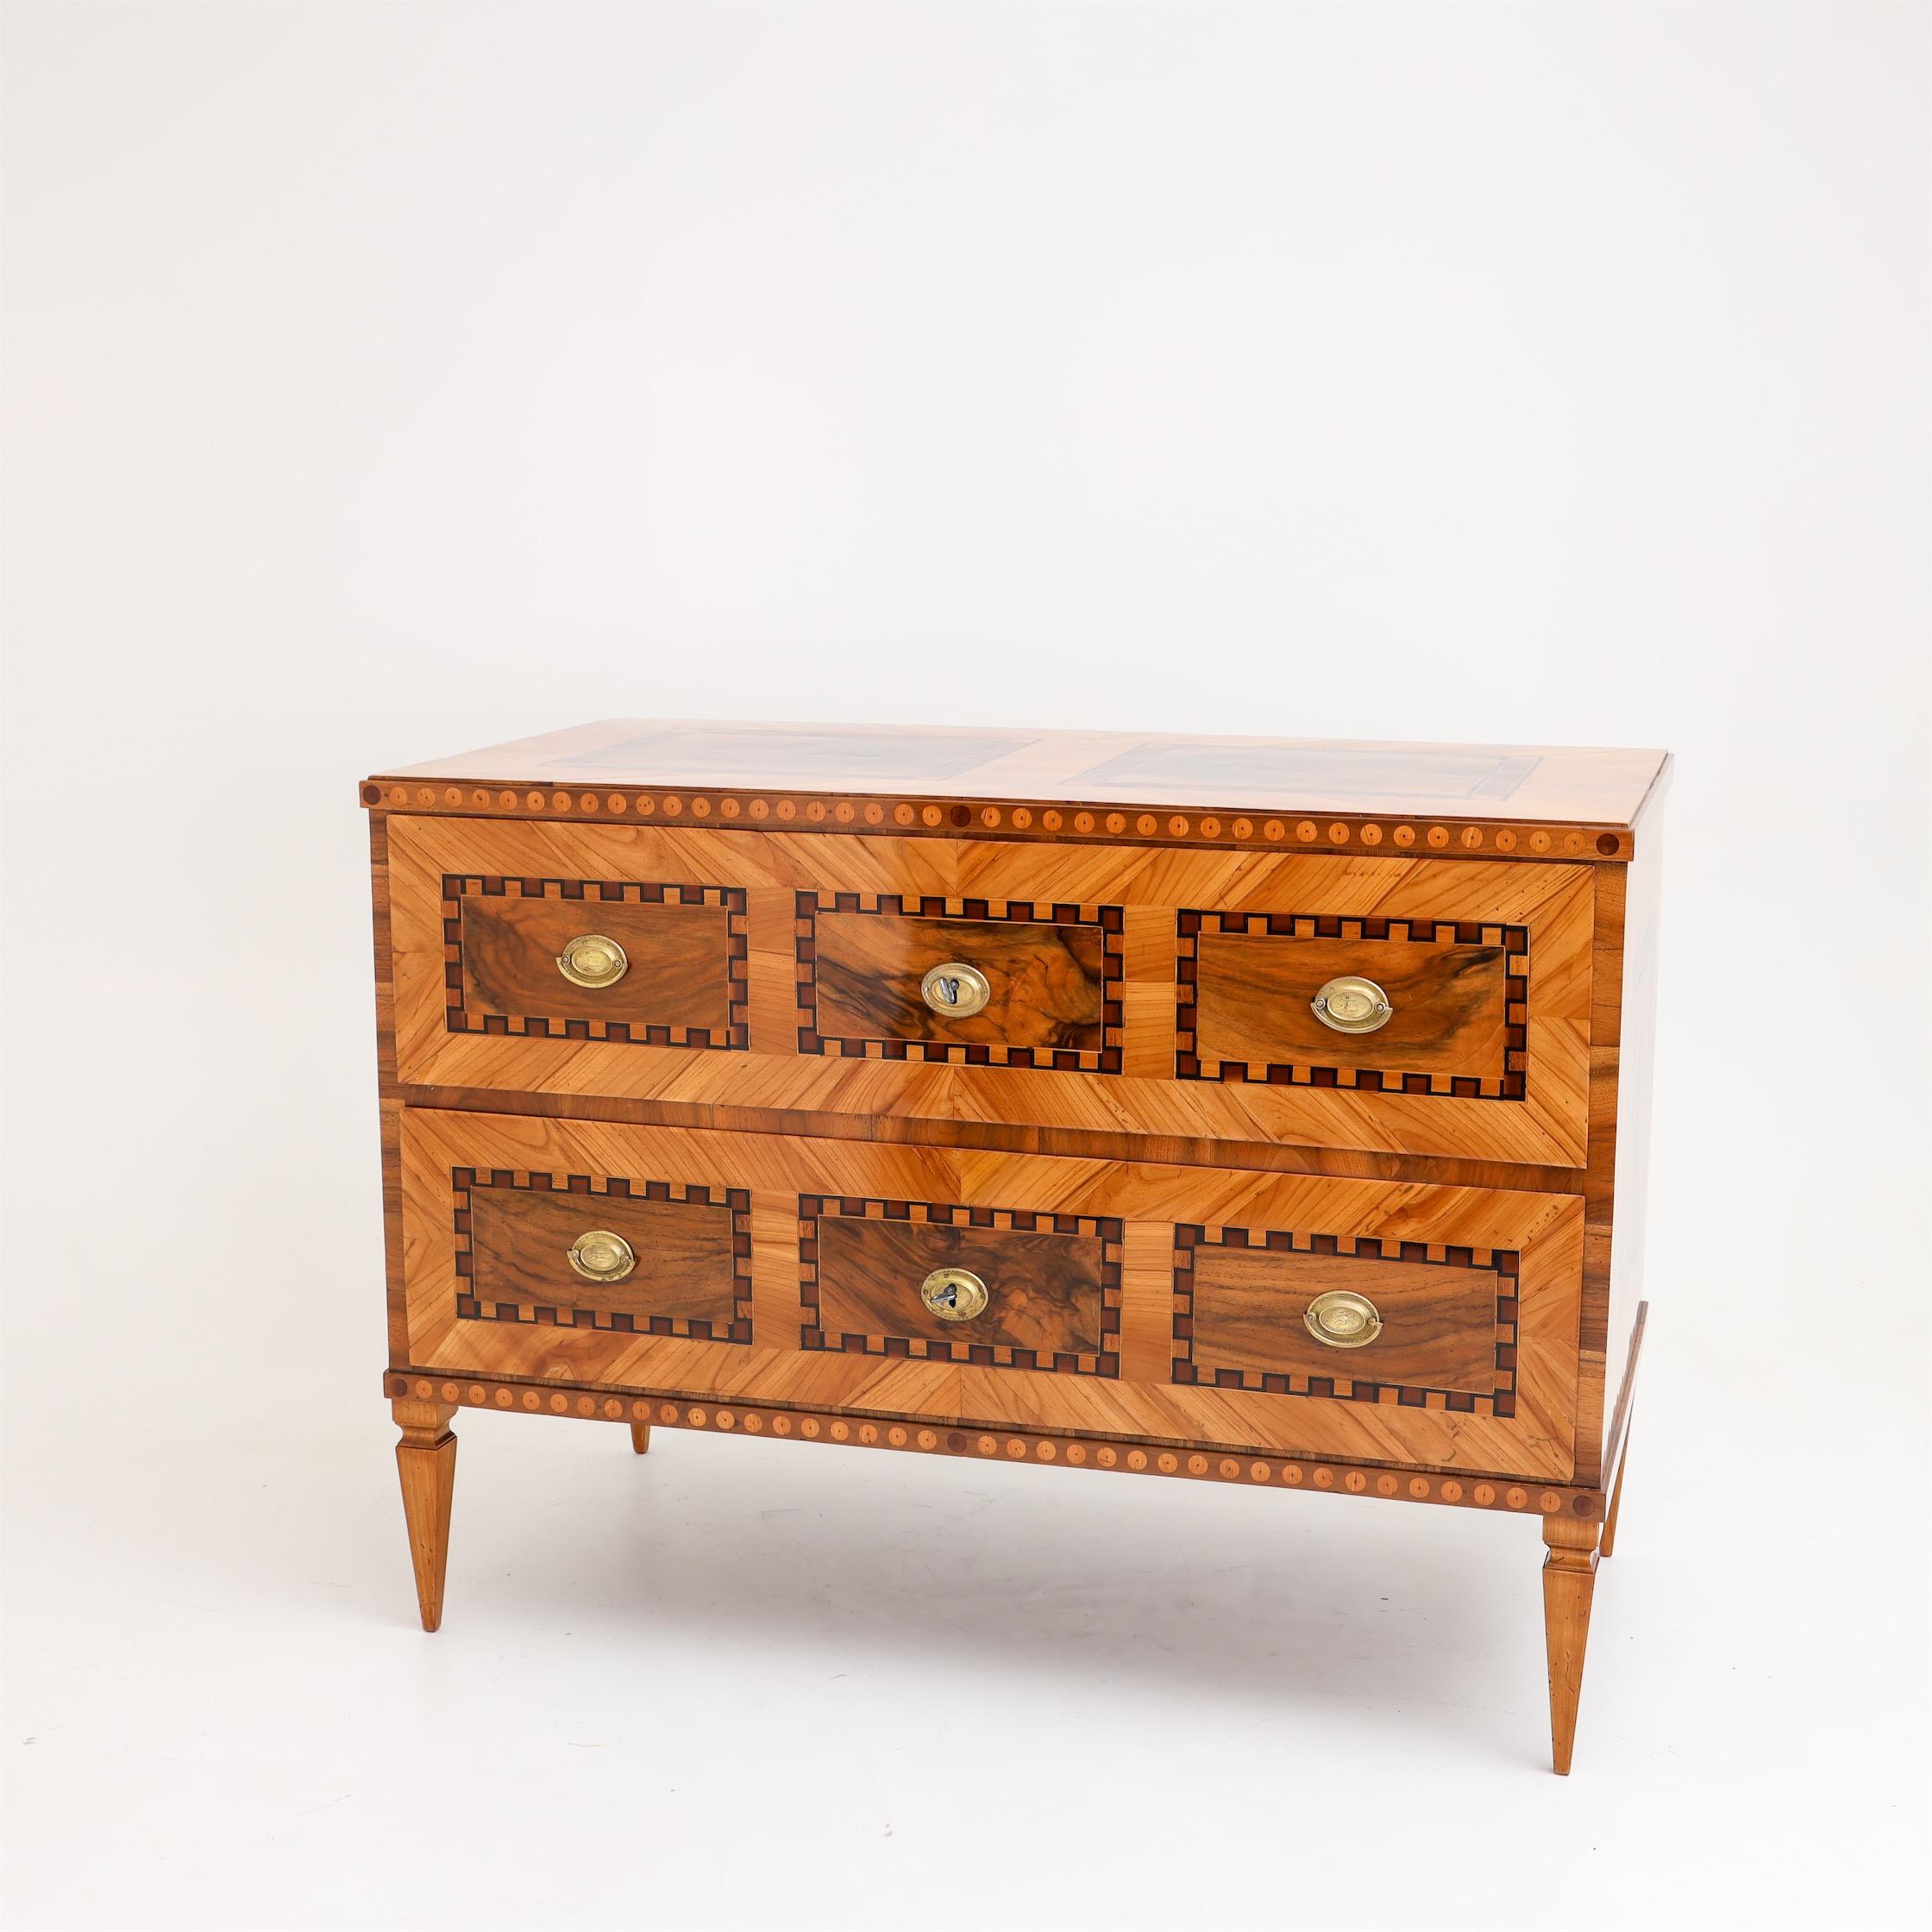 Louis Seize chest of drawers on square tapering feet with two drawers. Framing marquetry work on all sides. The chest of drawers has been professionally restored and hand polished.